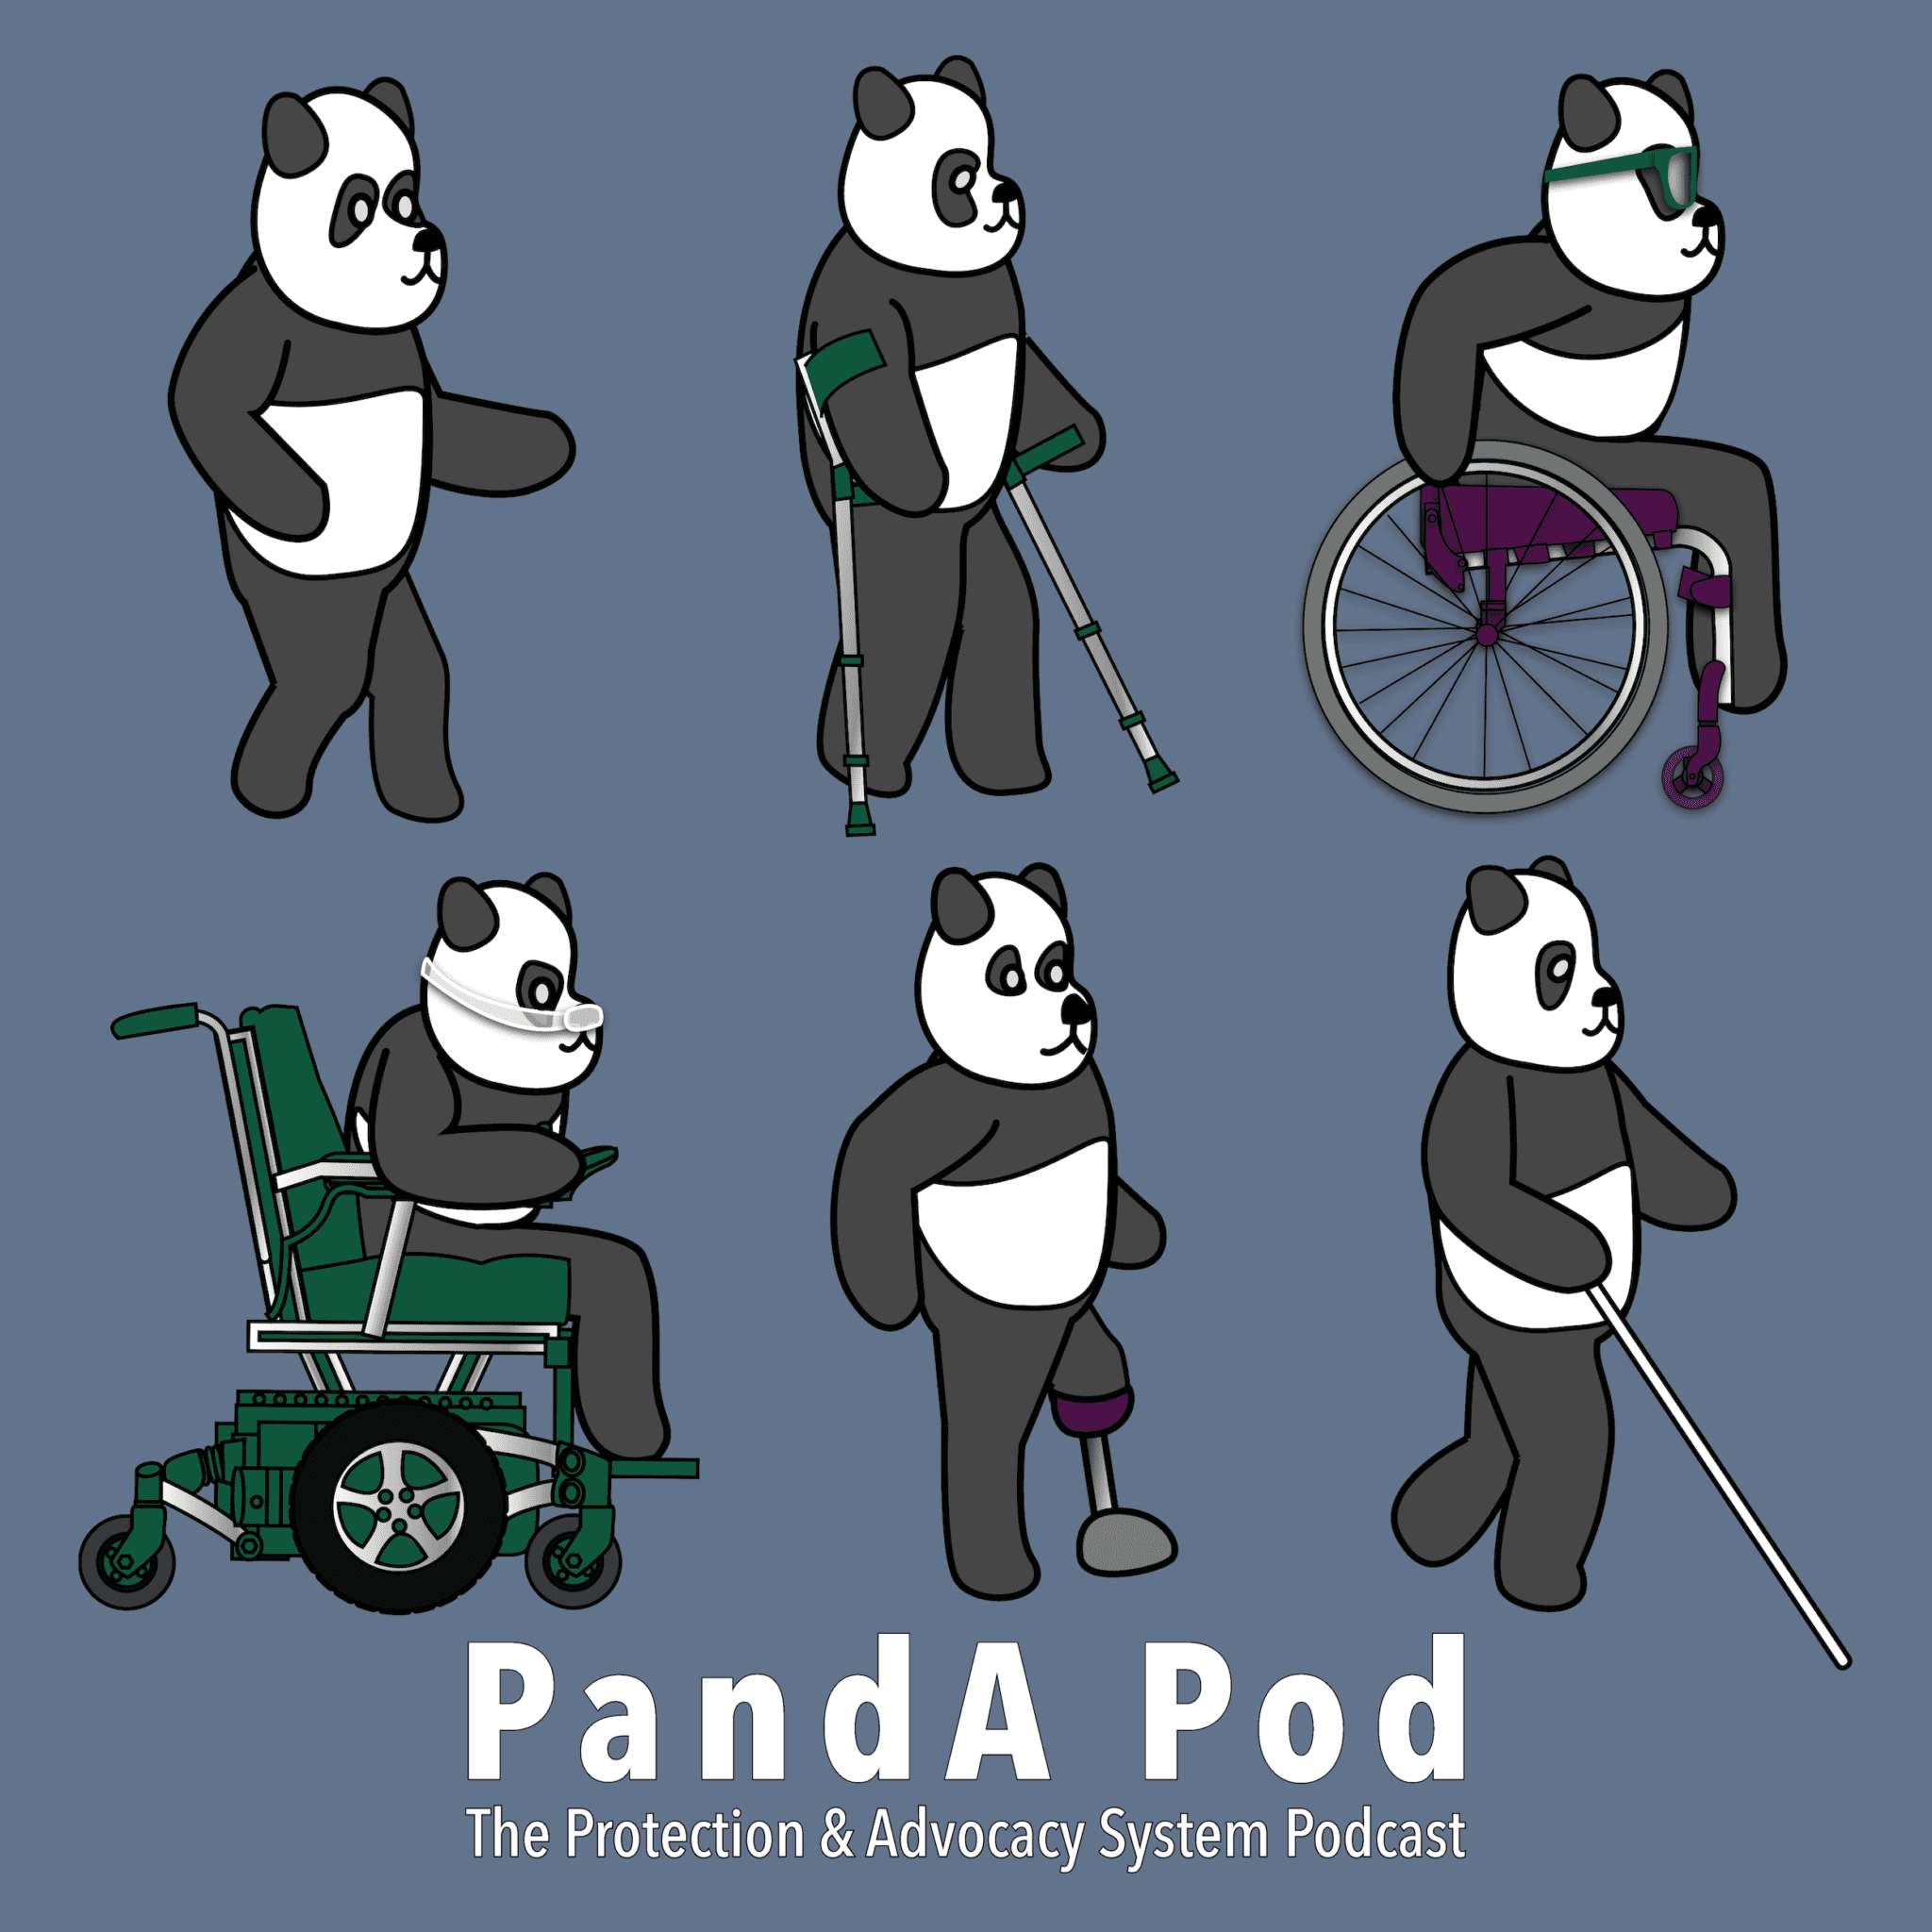 Profile of six pandas with different disabilities facing the right. One with no apparent disabilities, one with crutches, one uses a manual wheelchair wearing sunglasses, one uses a power wheelchair wearing a mask over its nose, one has a prosthetic limb and one uses a white cane. Artist Mike Mort.